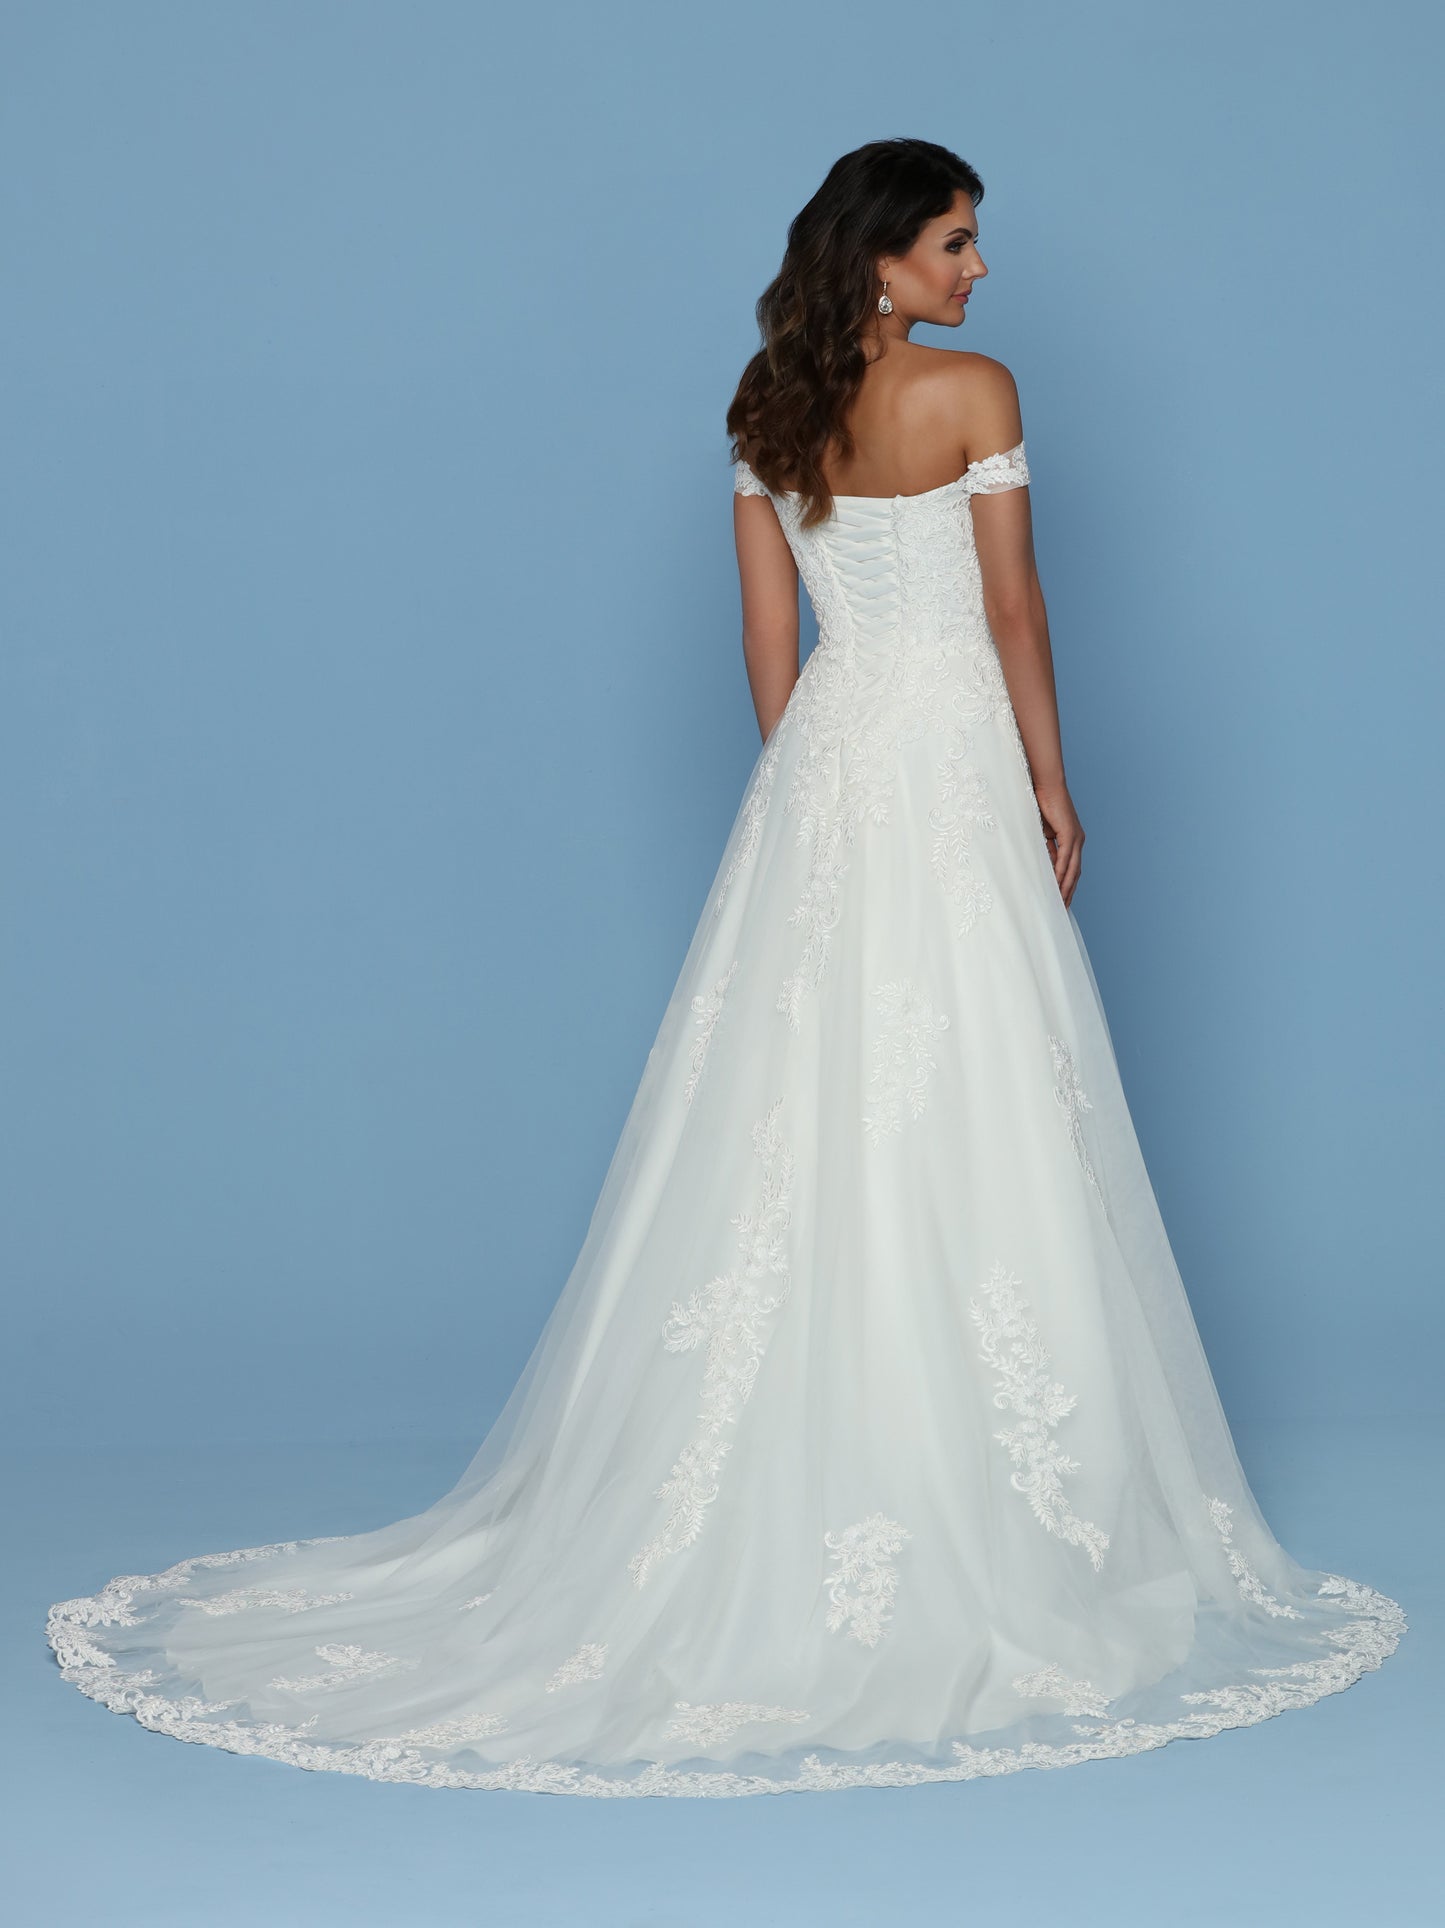 Davinci Bridal 50556 is a Beautiful Tulle & Lace A Line Ballgown Wedding Dress. Featuring an Off the Shoulder Sheer Lace Strap and a strapless sweetheart neckline. The bodice is delicately covered with lace cascading down into the skirt with a lush lace edge around the hem and train.  Available for 1-2 Week Delivery!!!  Available Sizes: 2,4,6,8,10,12,14,16,18,20  Available Colors: Ivory